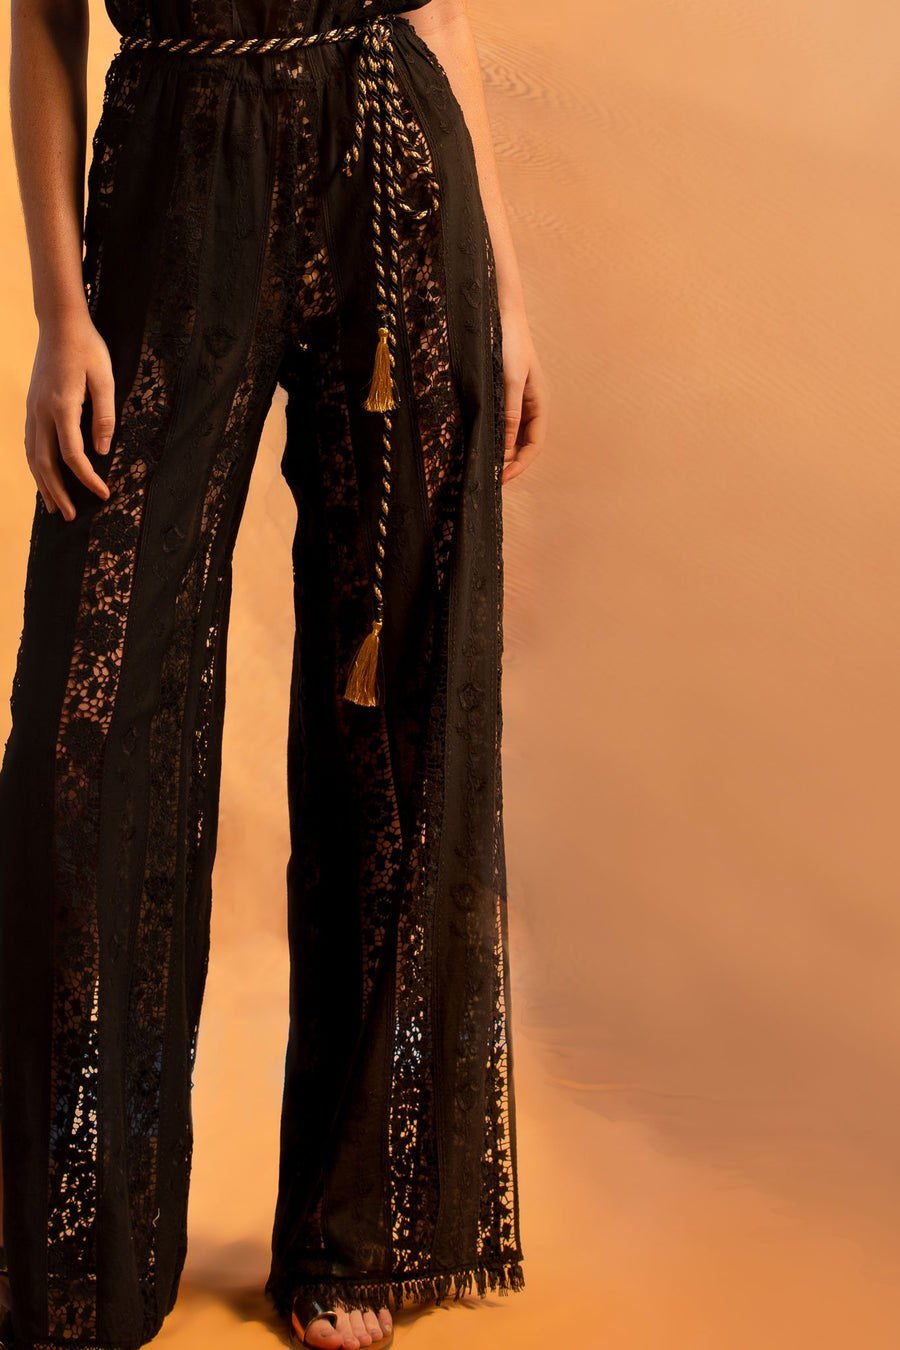 This is a detail photo of the bottom of a black cotton lace embroidered jumpsuit with black fringe on the bottom hemline and side leg slits.